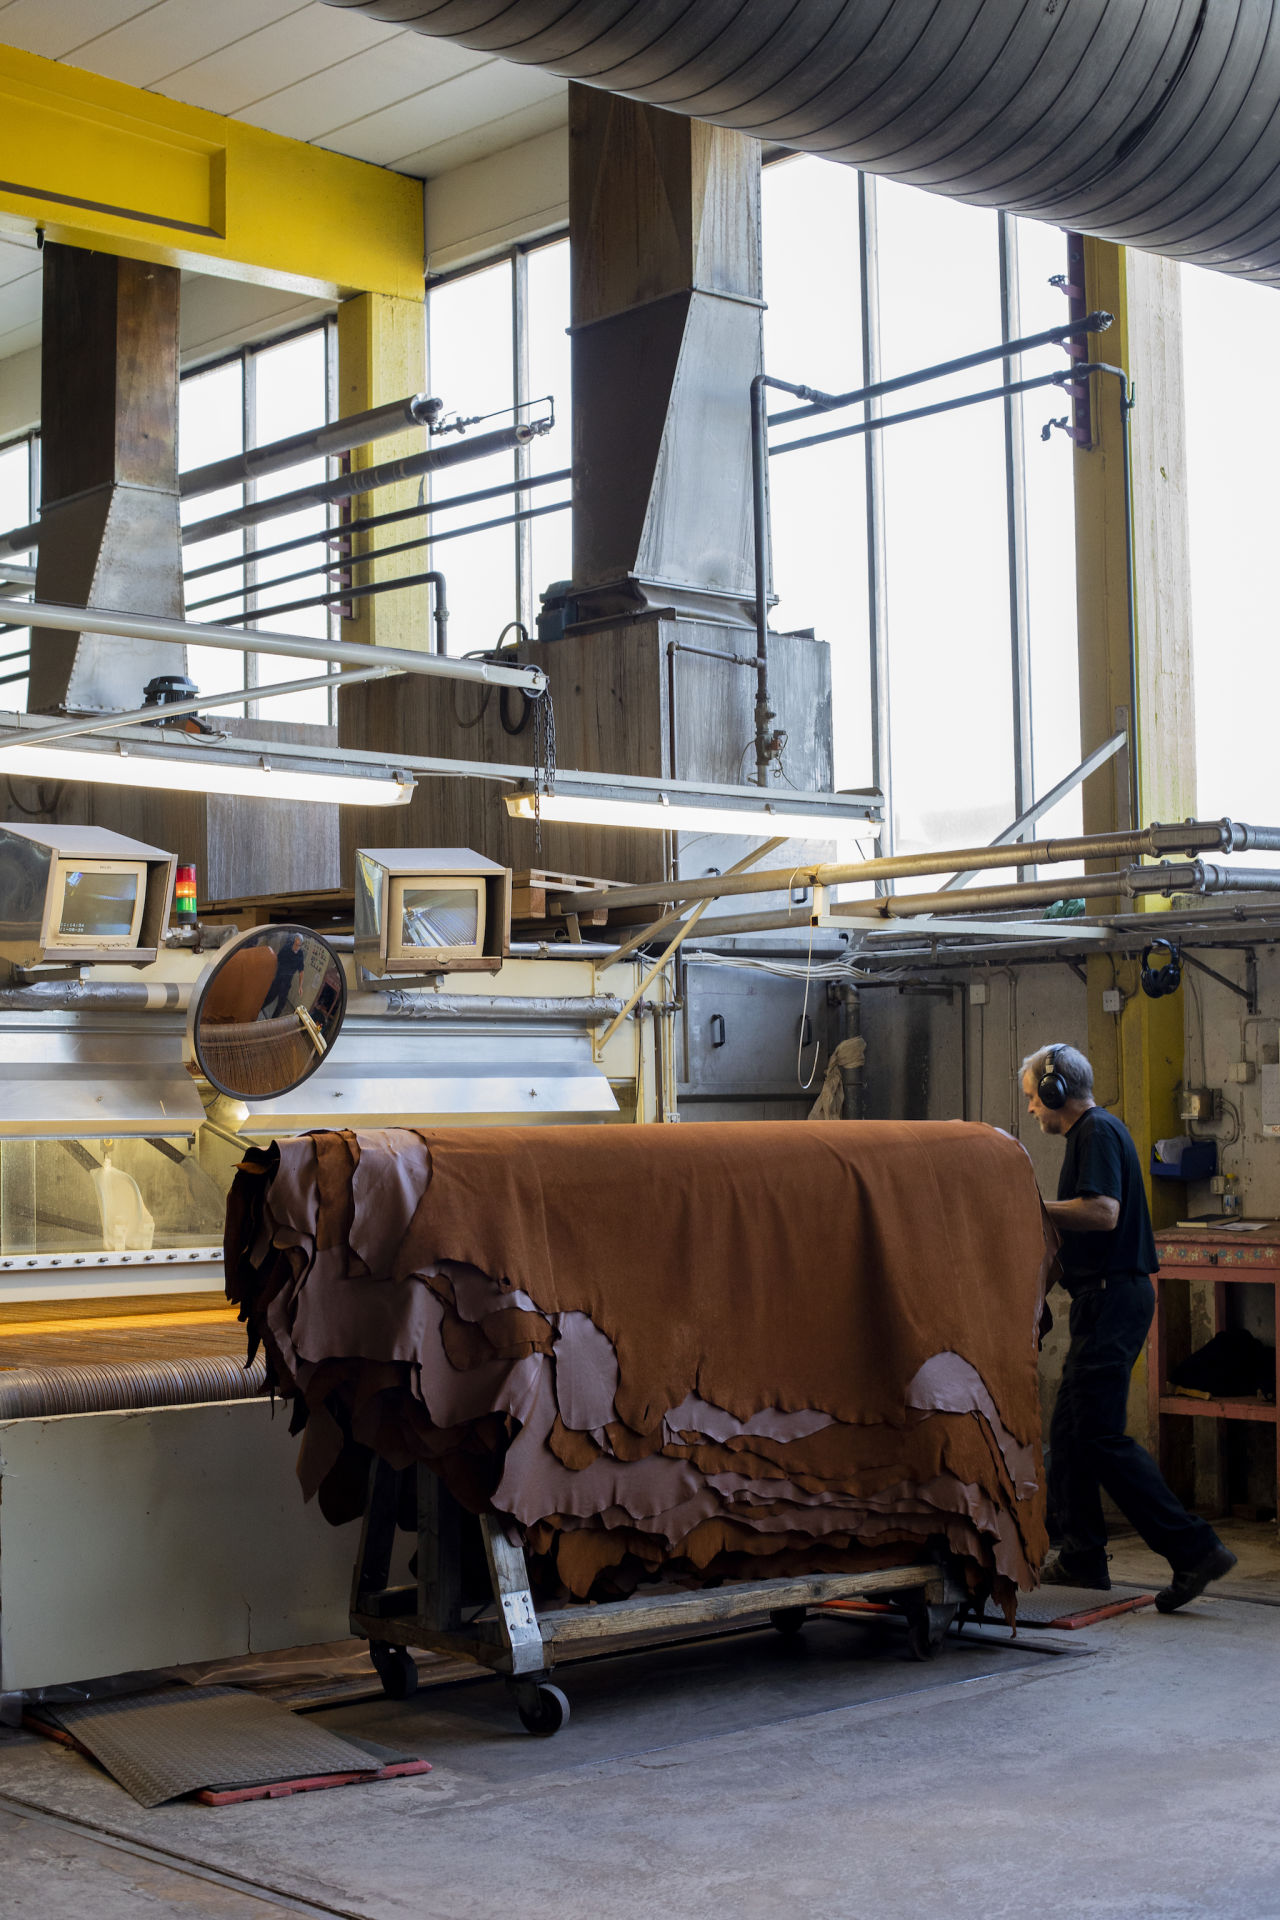 Editorial image from behind the scenes at Elmo Leather Factory.